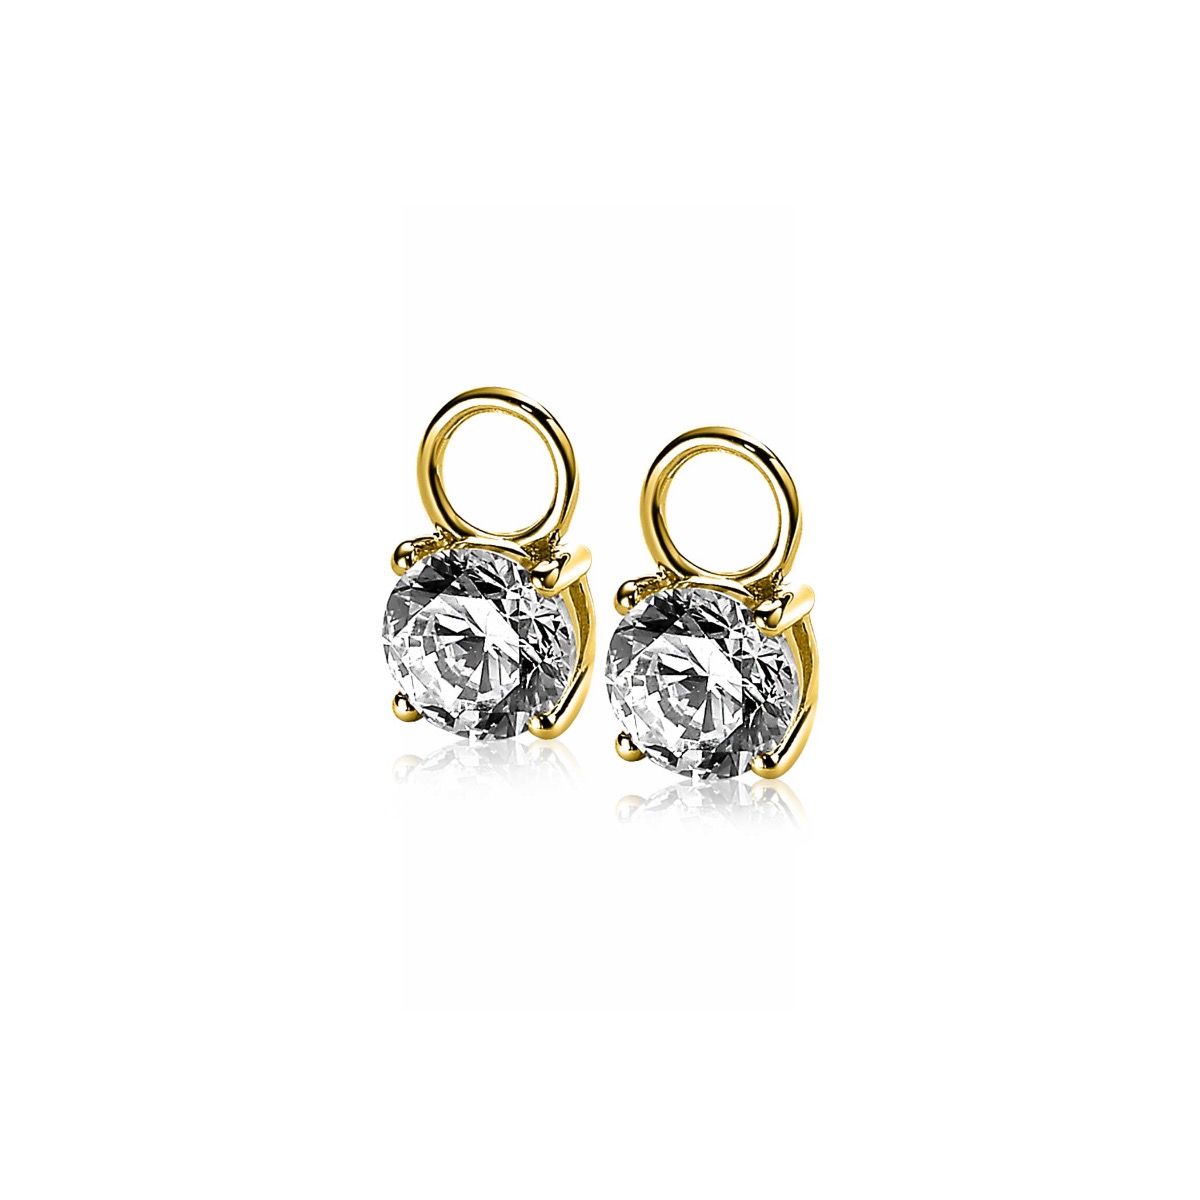 ZINZI Gold Plated Sterling Silver Earrings Pendants Round White ZICH1300Y (excl. hoop earrings)